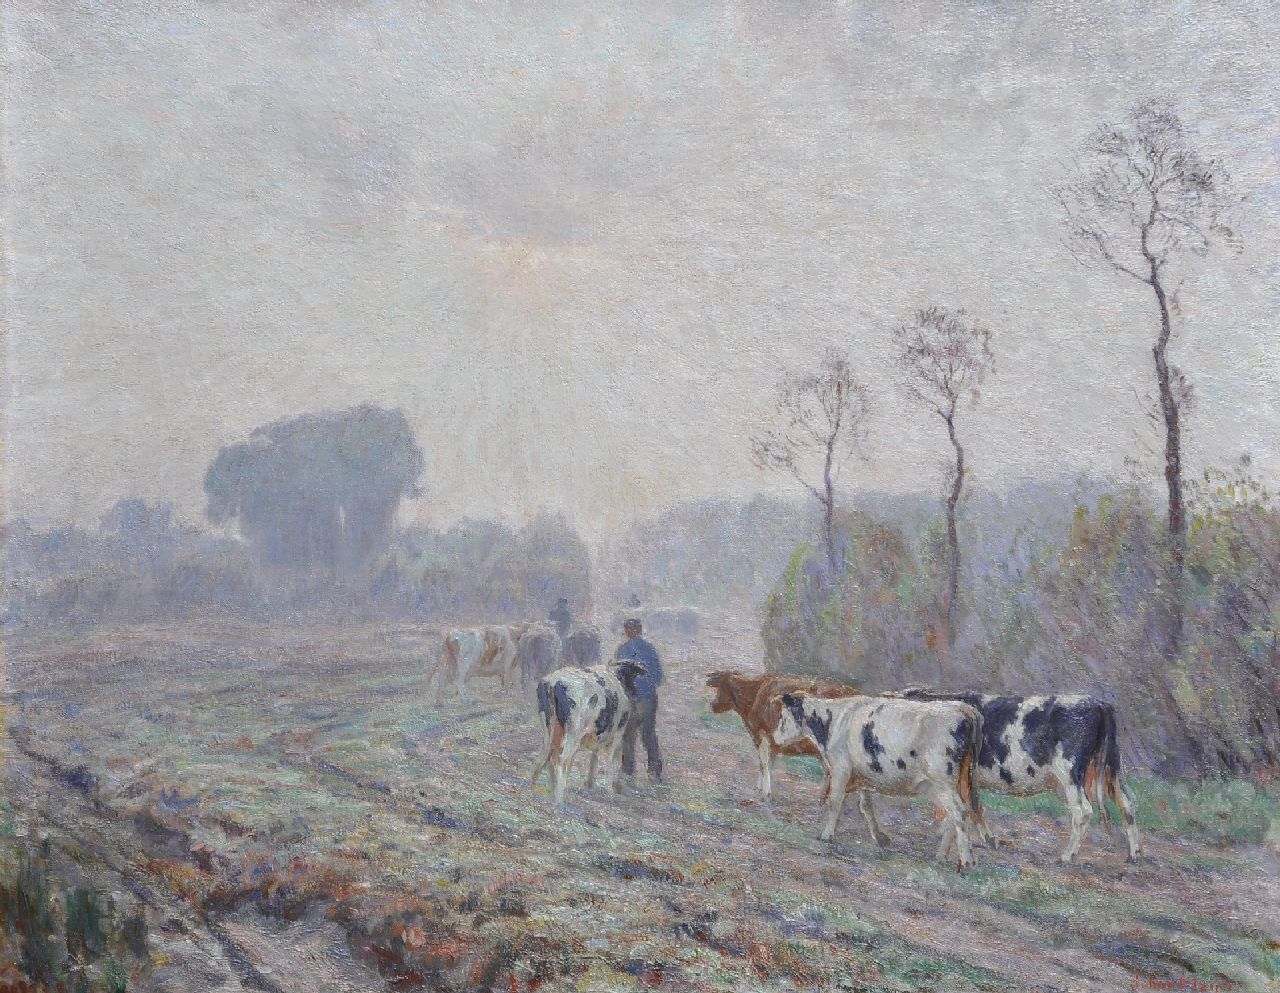 Meijer J.  | Johannes 'Johan' Meijer | Paintings offered for sale | Early morning: on the way to the common land, oil on canvas 65.2 x 85.7 cm, signed l.r.